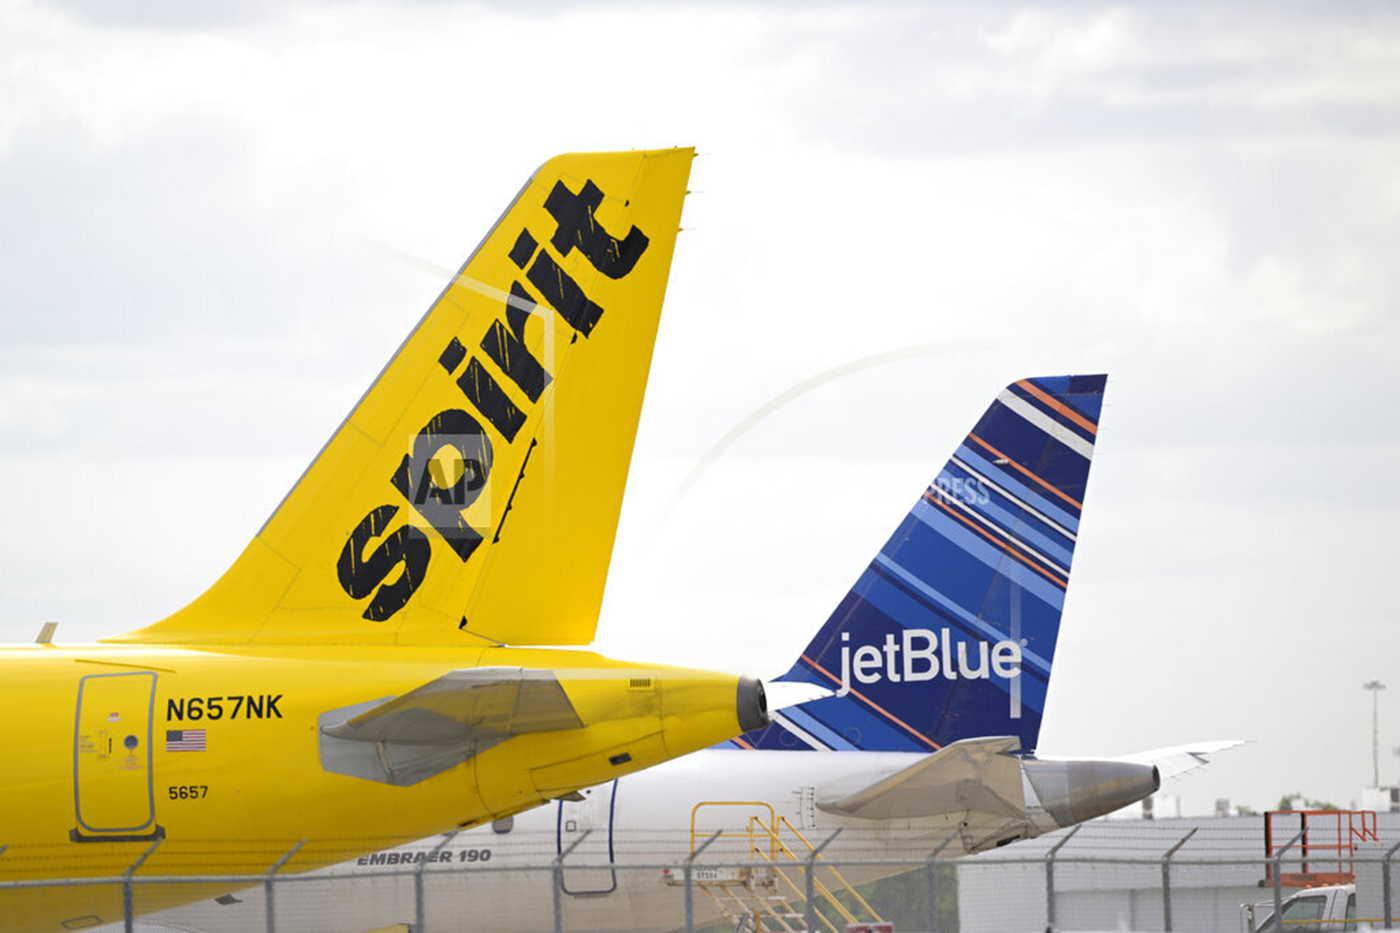 tail wing of spirit airlines and jetblue airlines planes next to each other